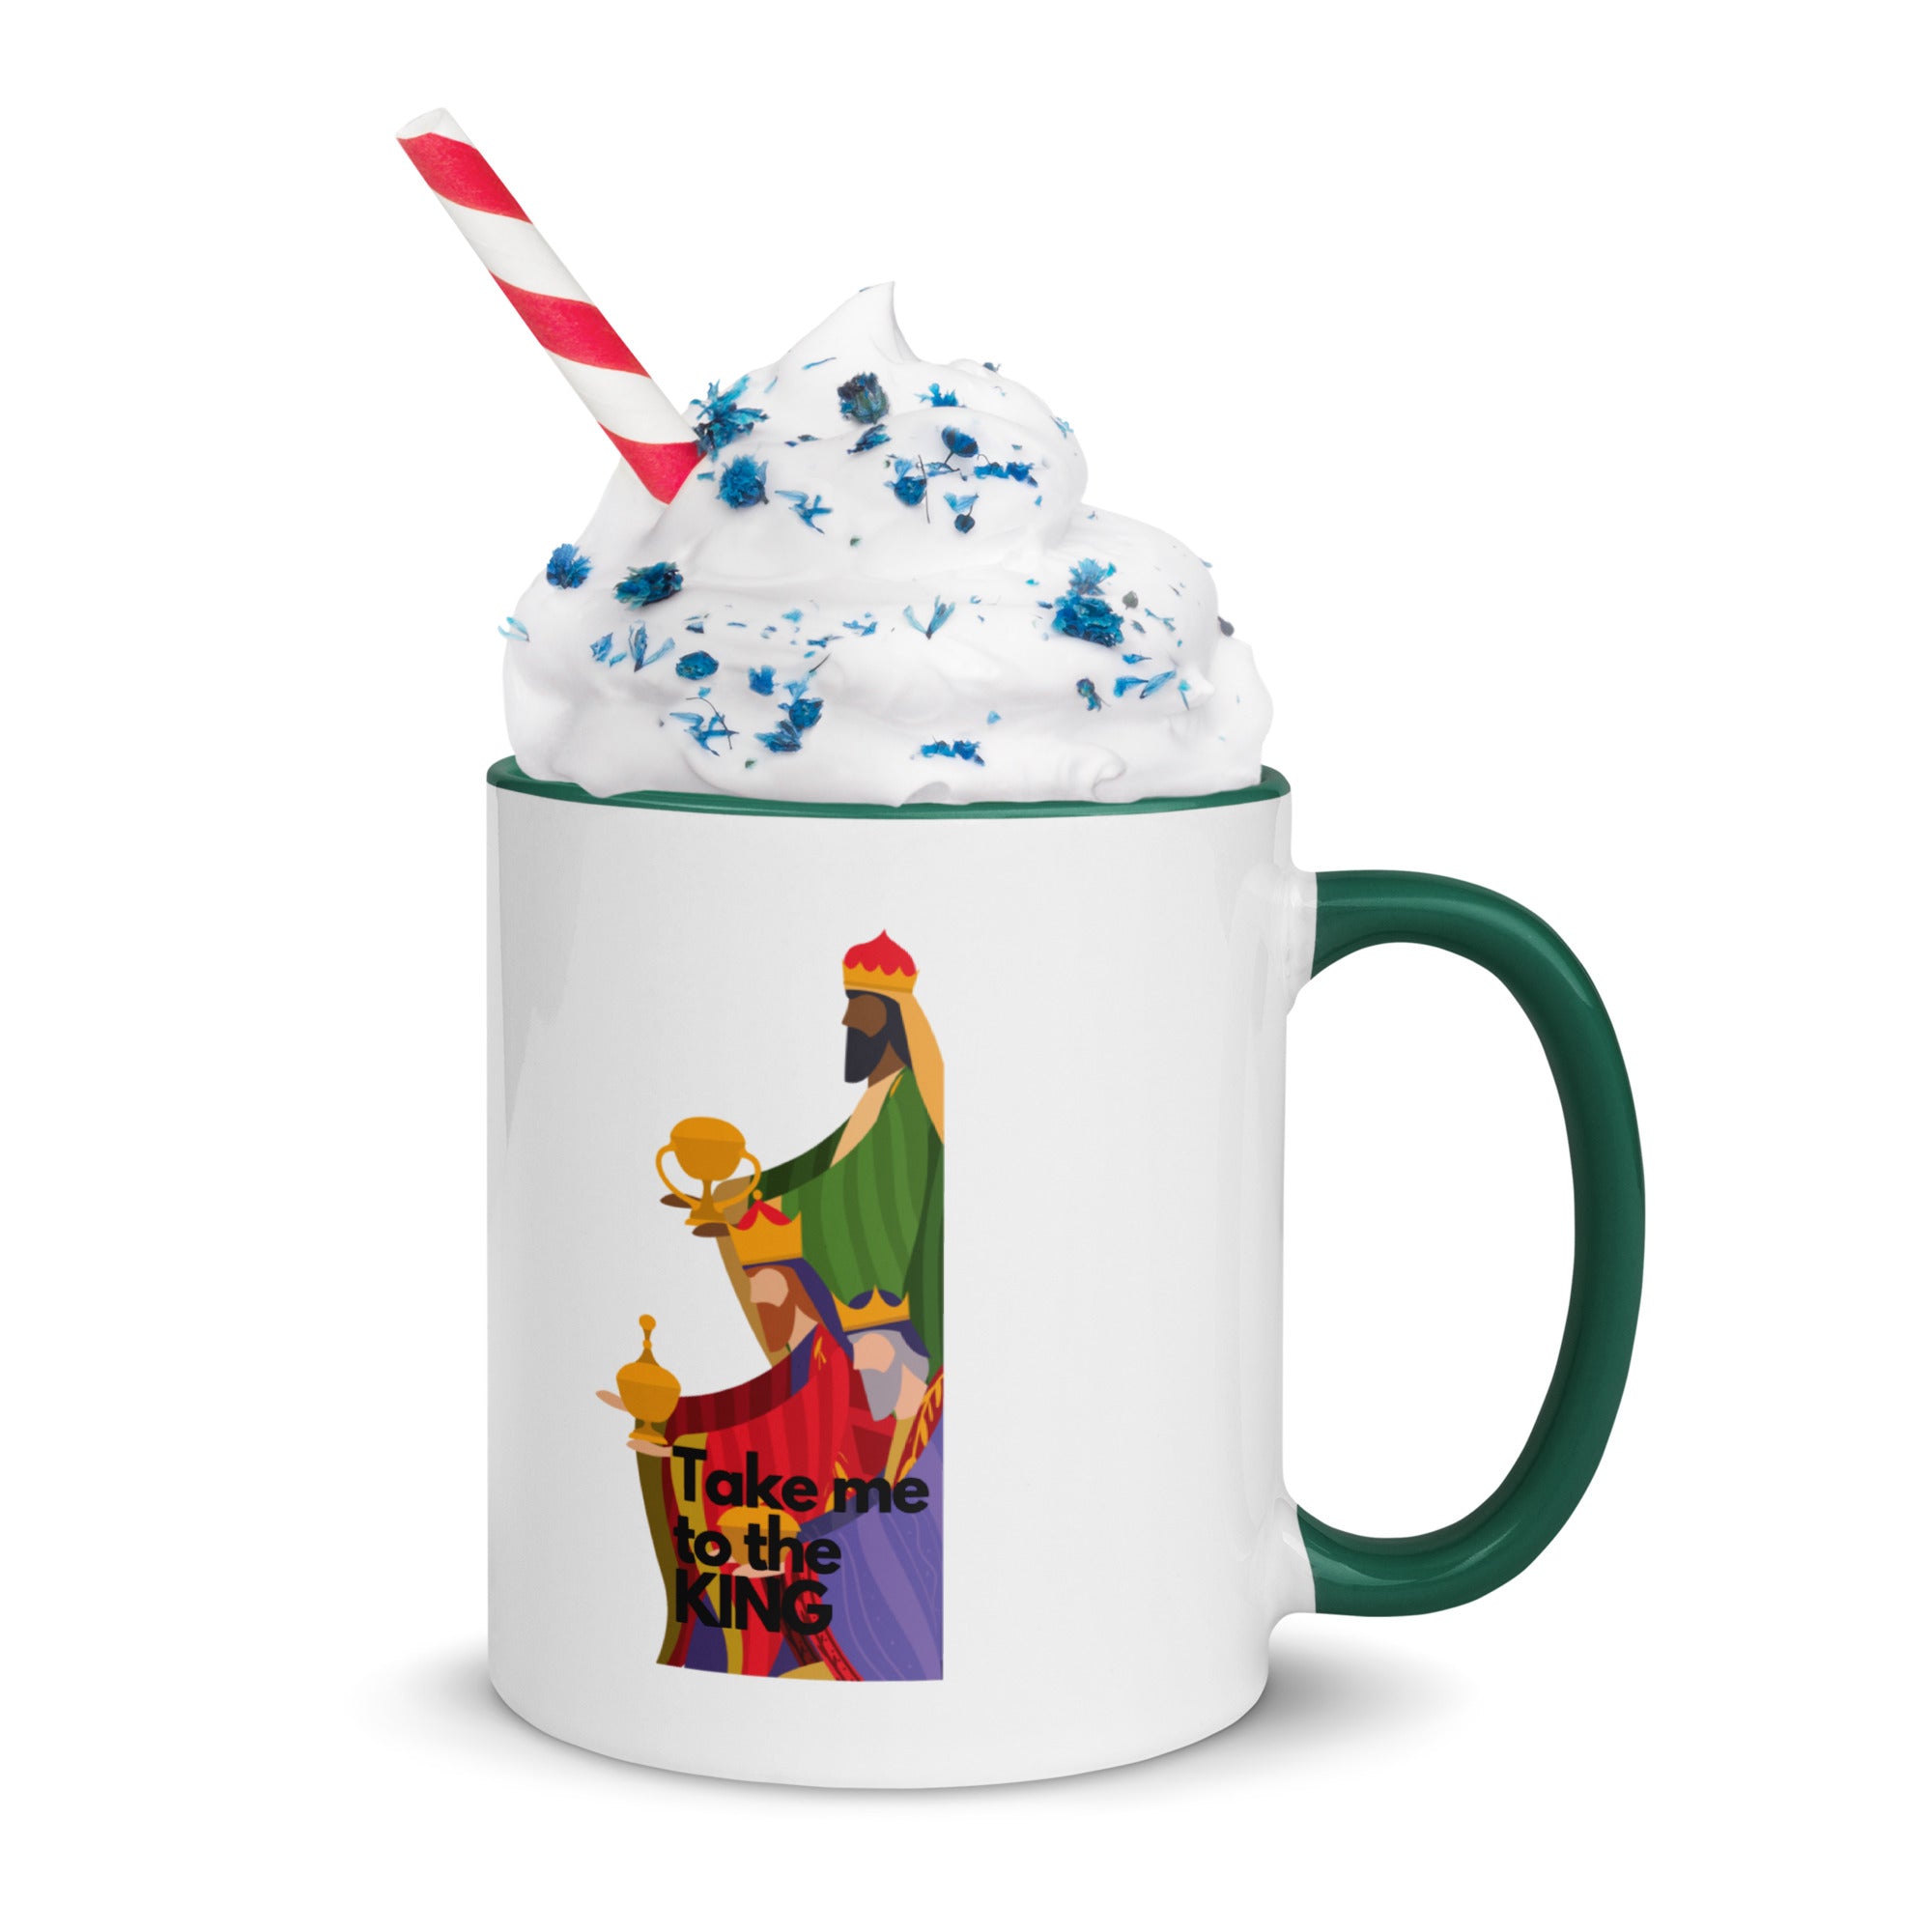 Take me to the King- Christmas Mug with Red or Green inner Coloured Coating